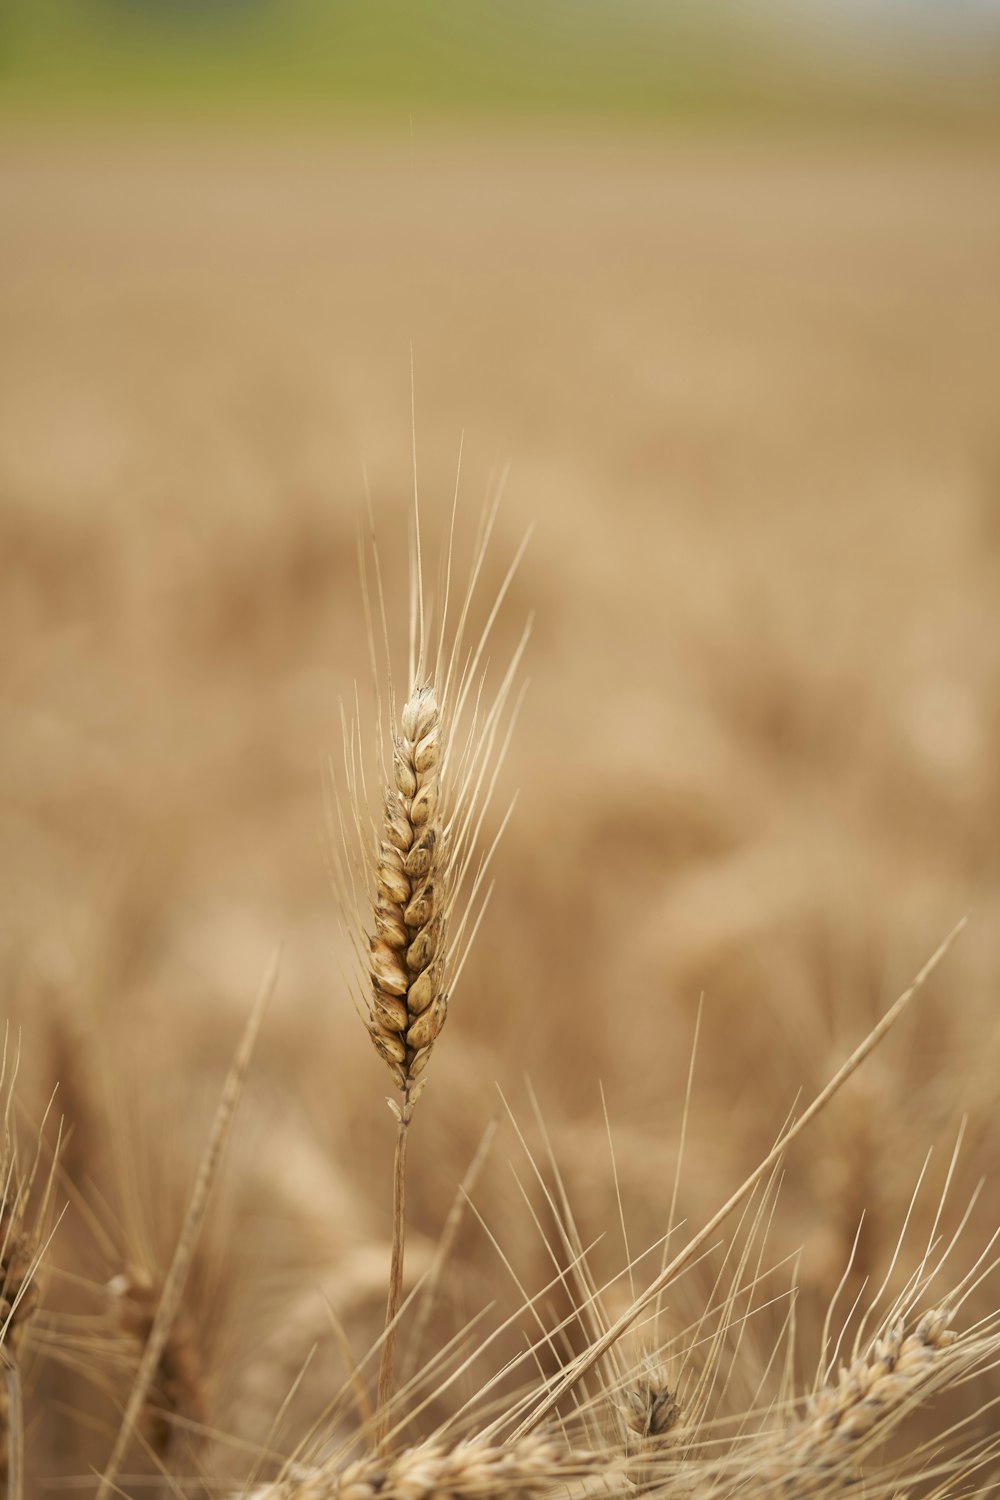 a close up of a wheat field with a blurry background